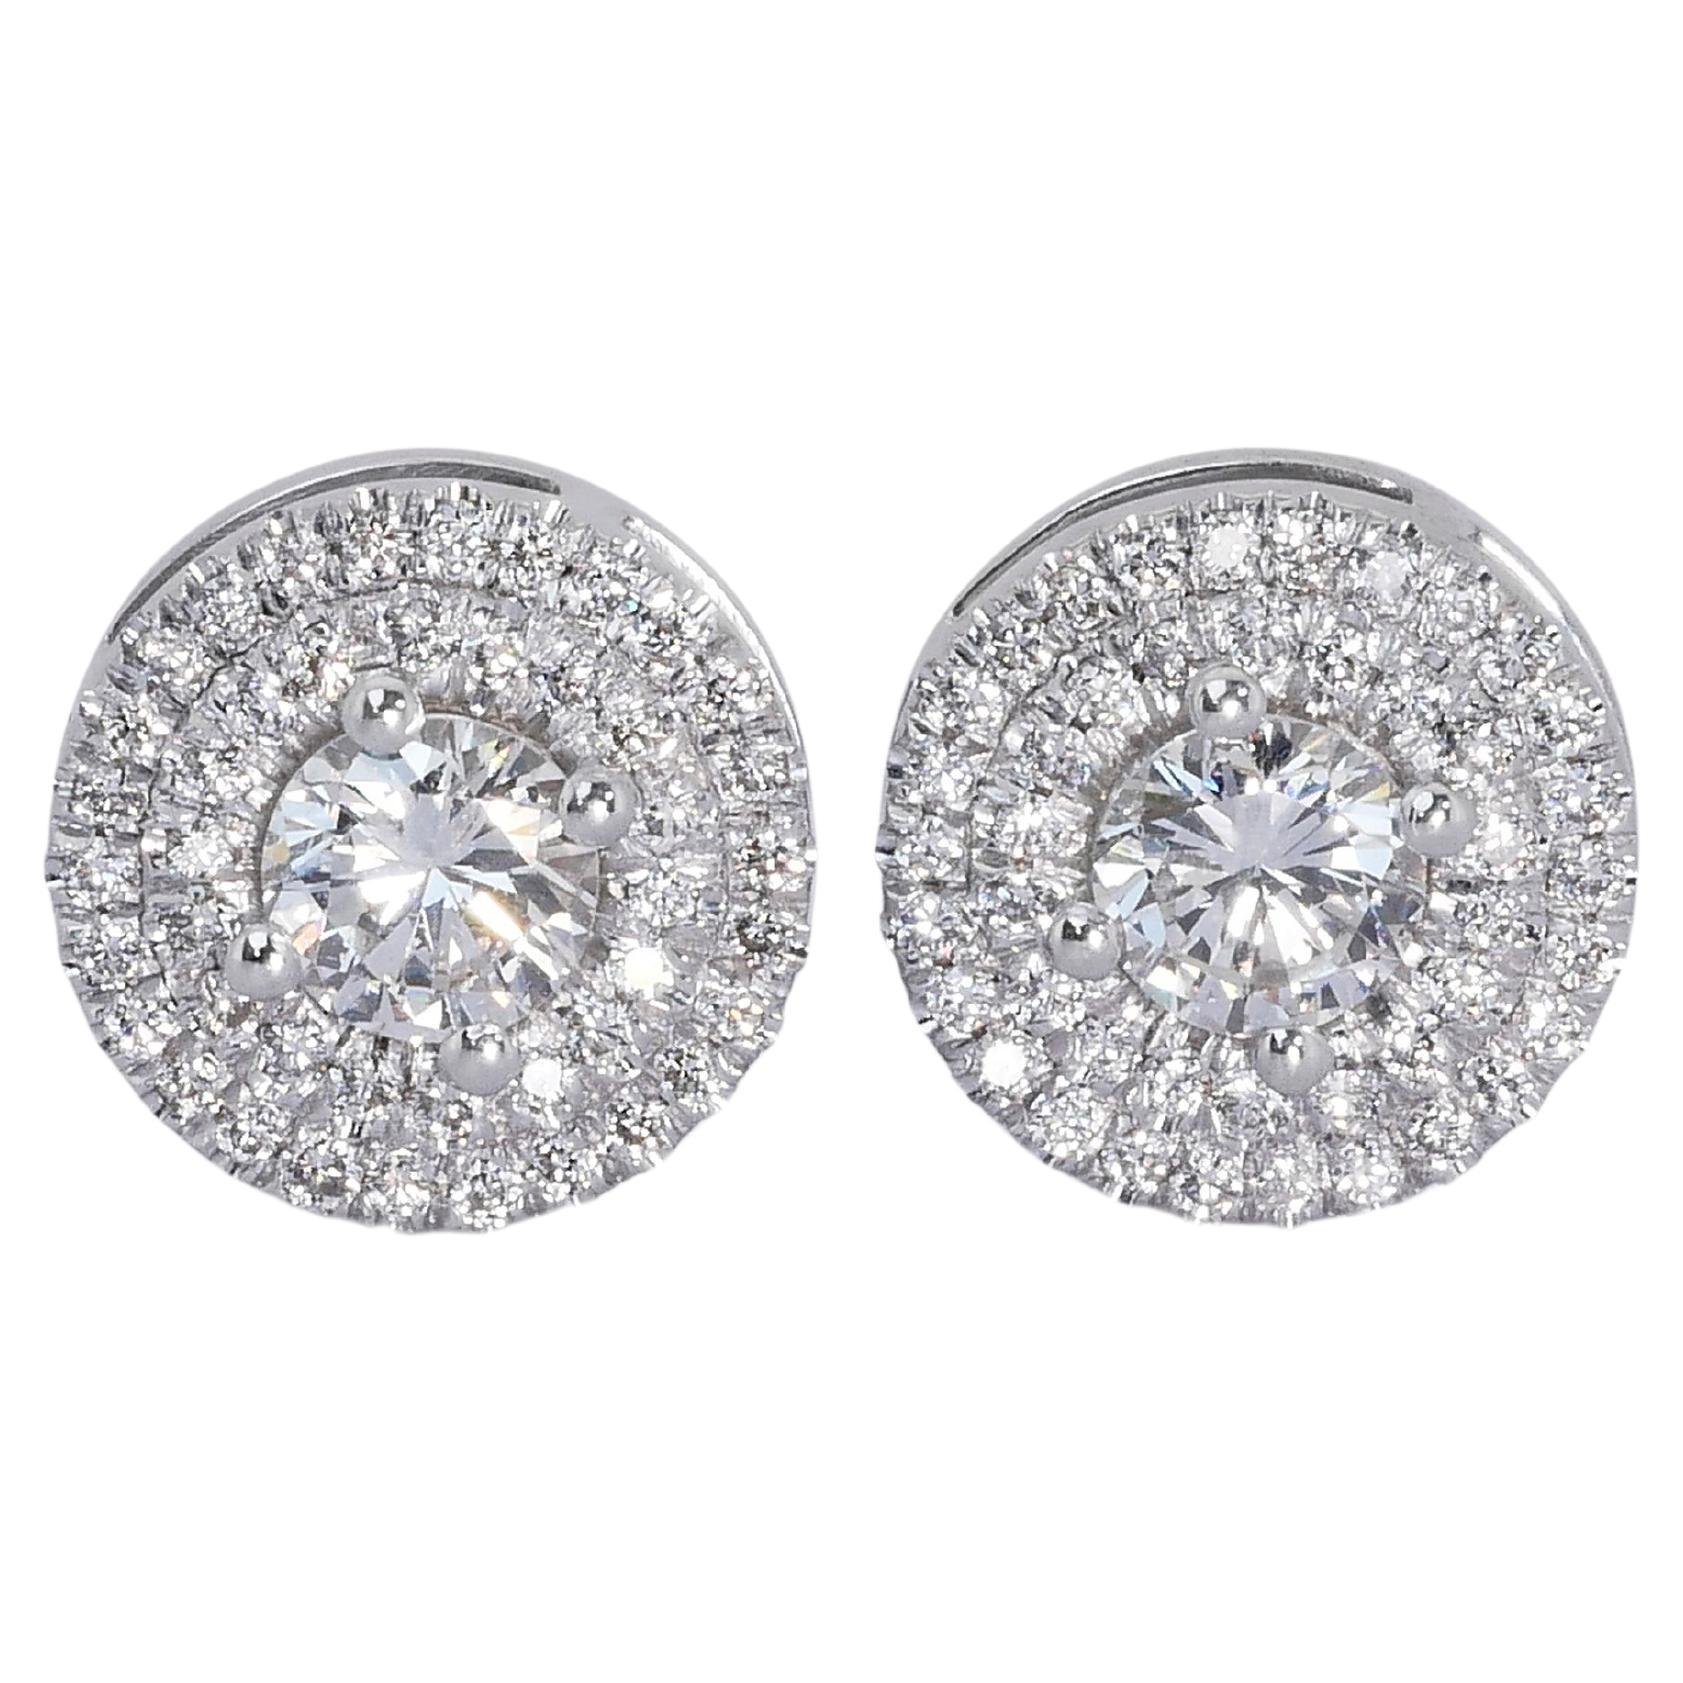 Radiant 1.20ct Diamonds Halo Stud Earrings in 18k White Gold - GIA Certified For Sale